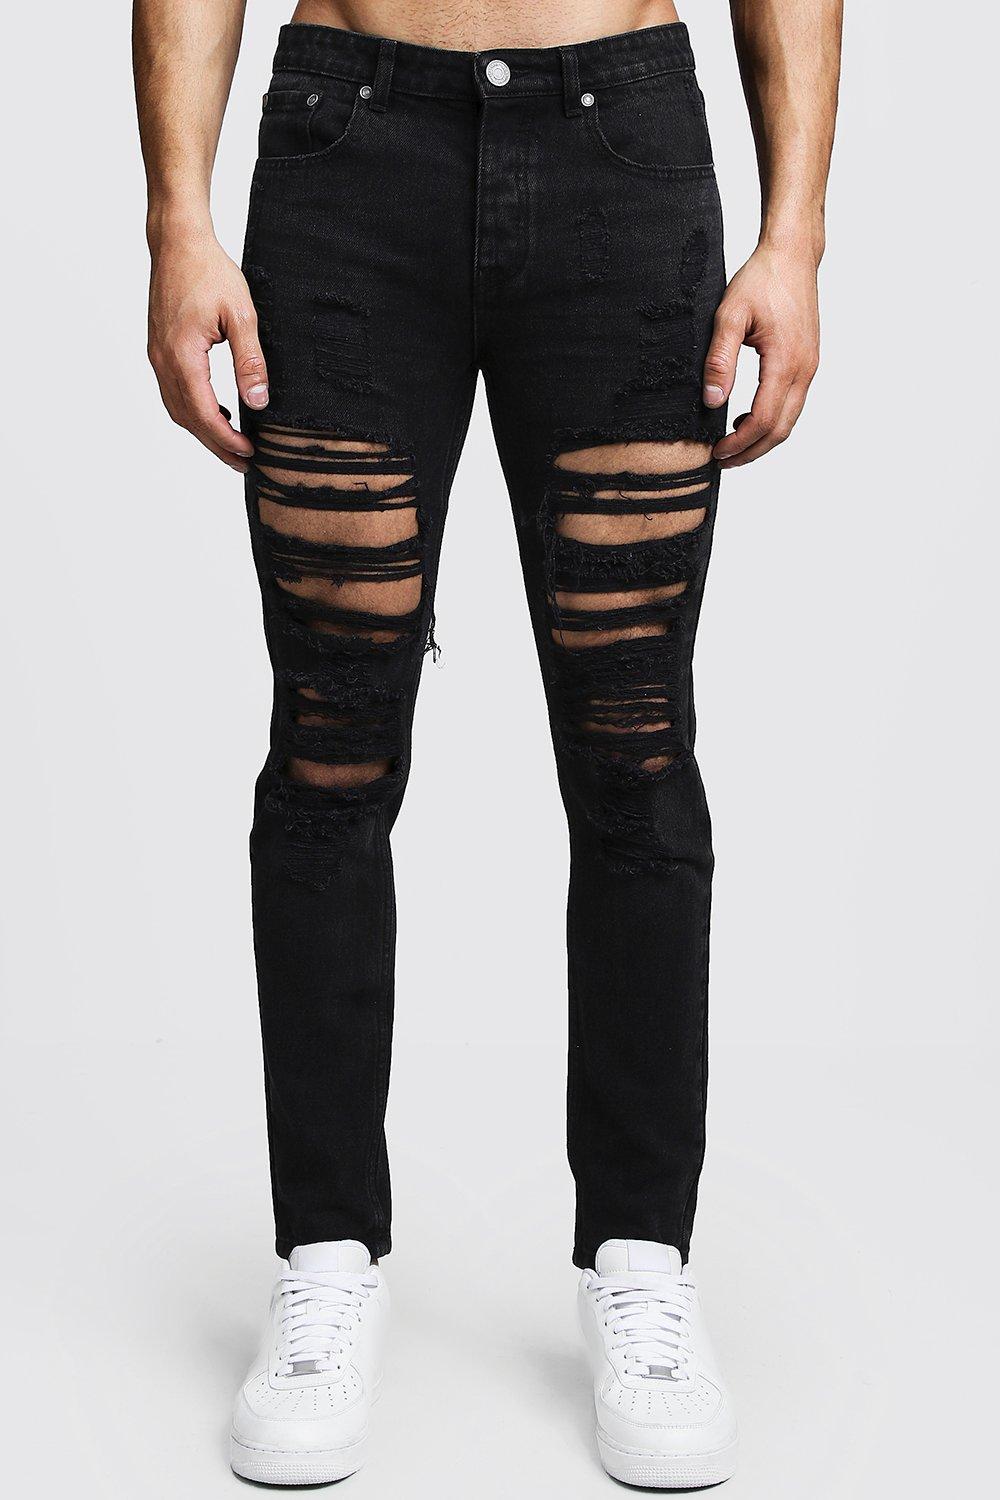 heavily distressed jeans mens